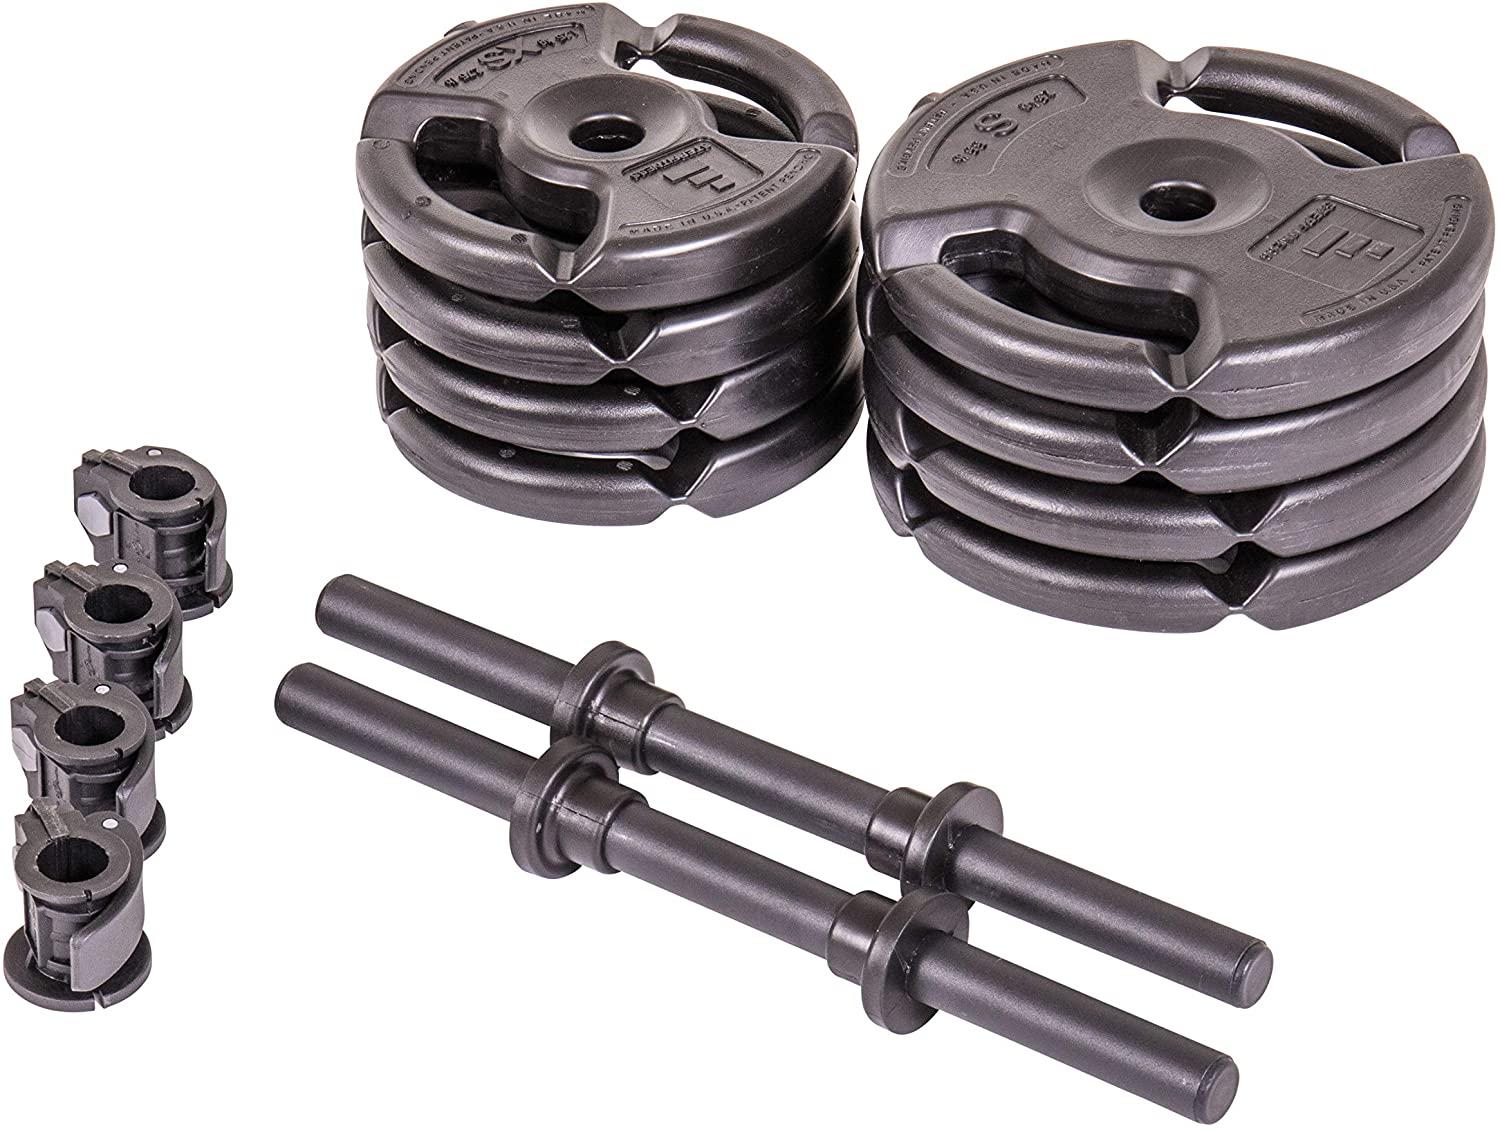 Includes The bar Details about   Club Quality 4-Weight Deluxe Barbell Set